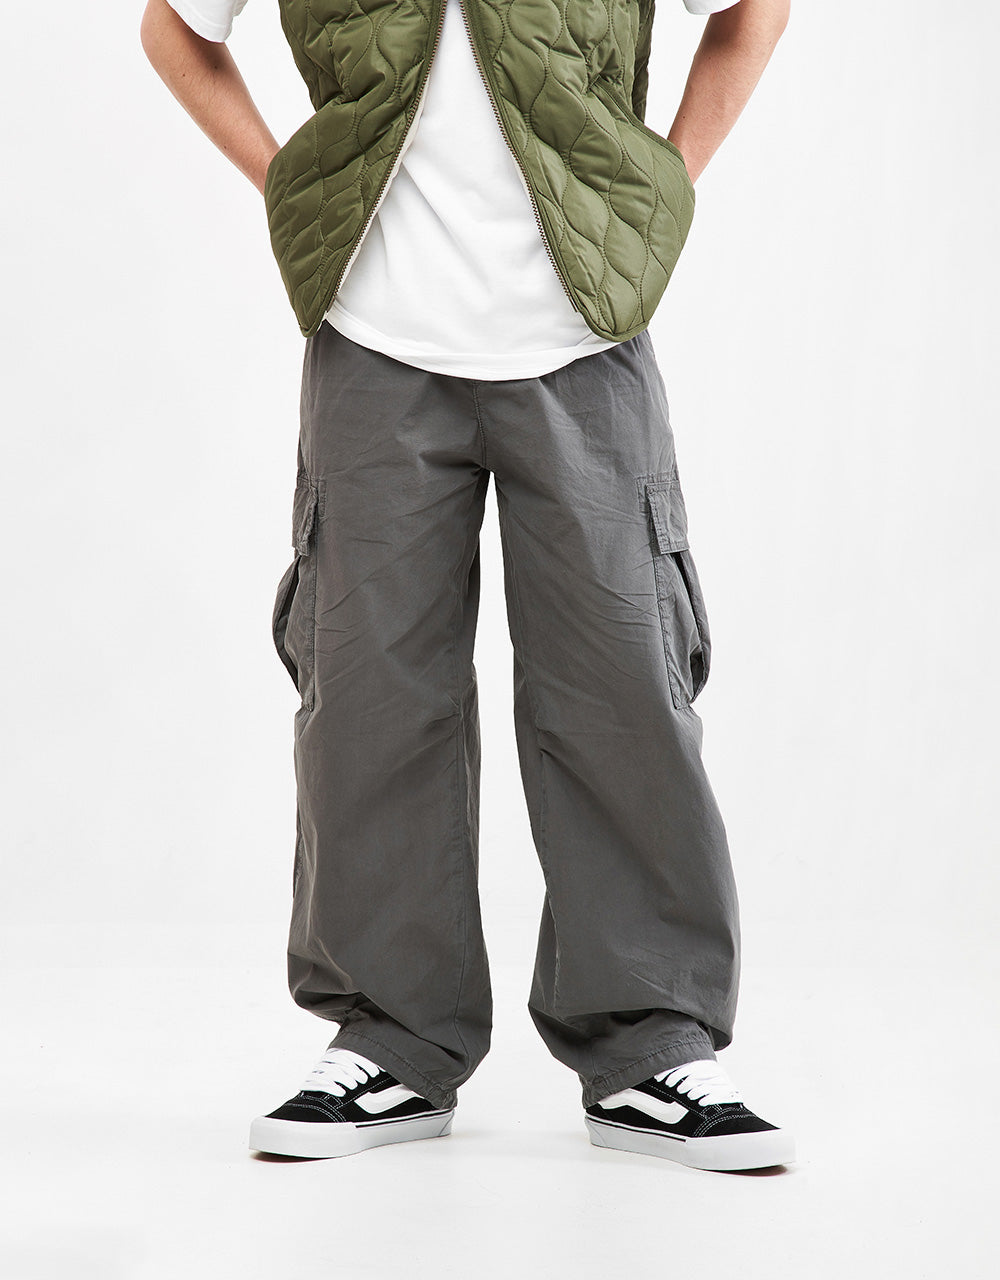 Route One Super Baggy Cargo Pant - Charcoal